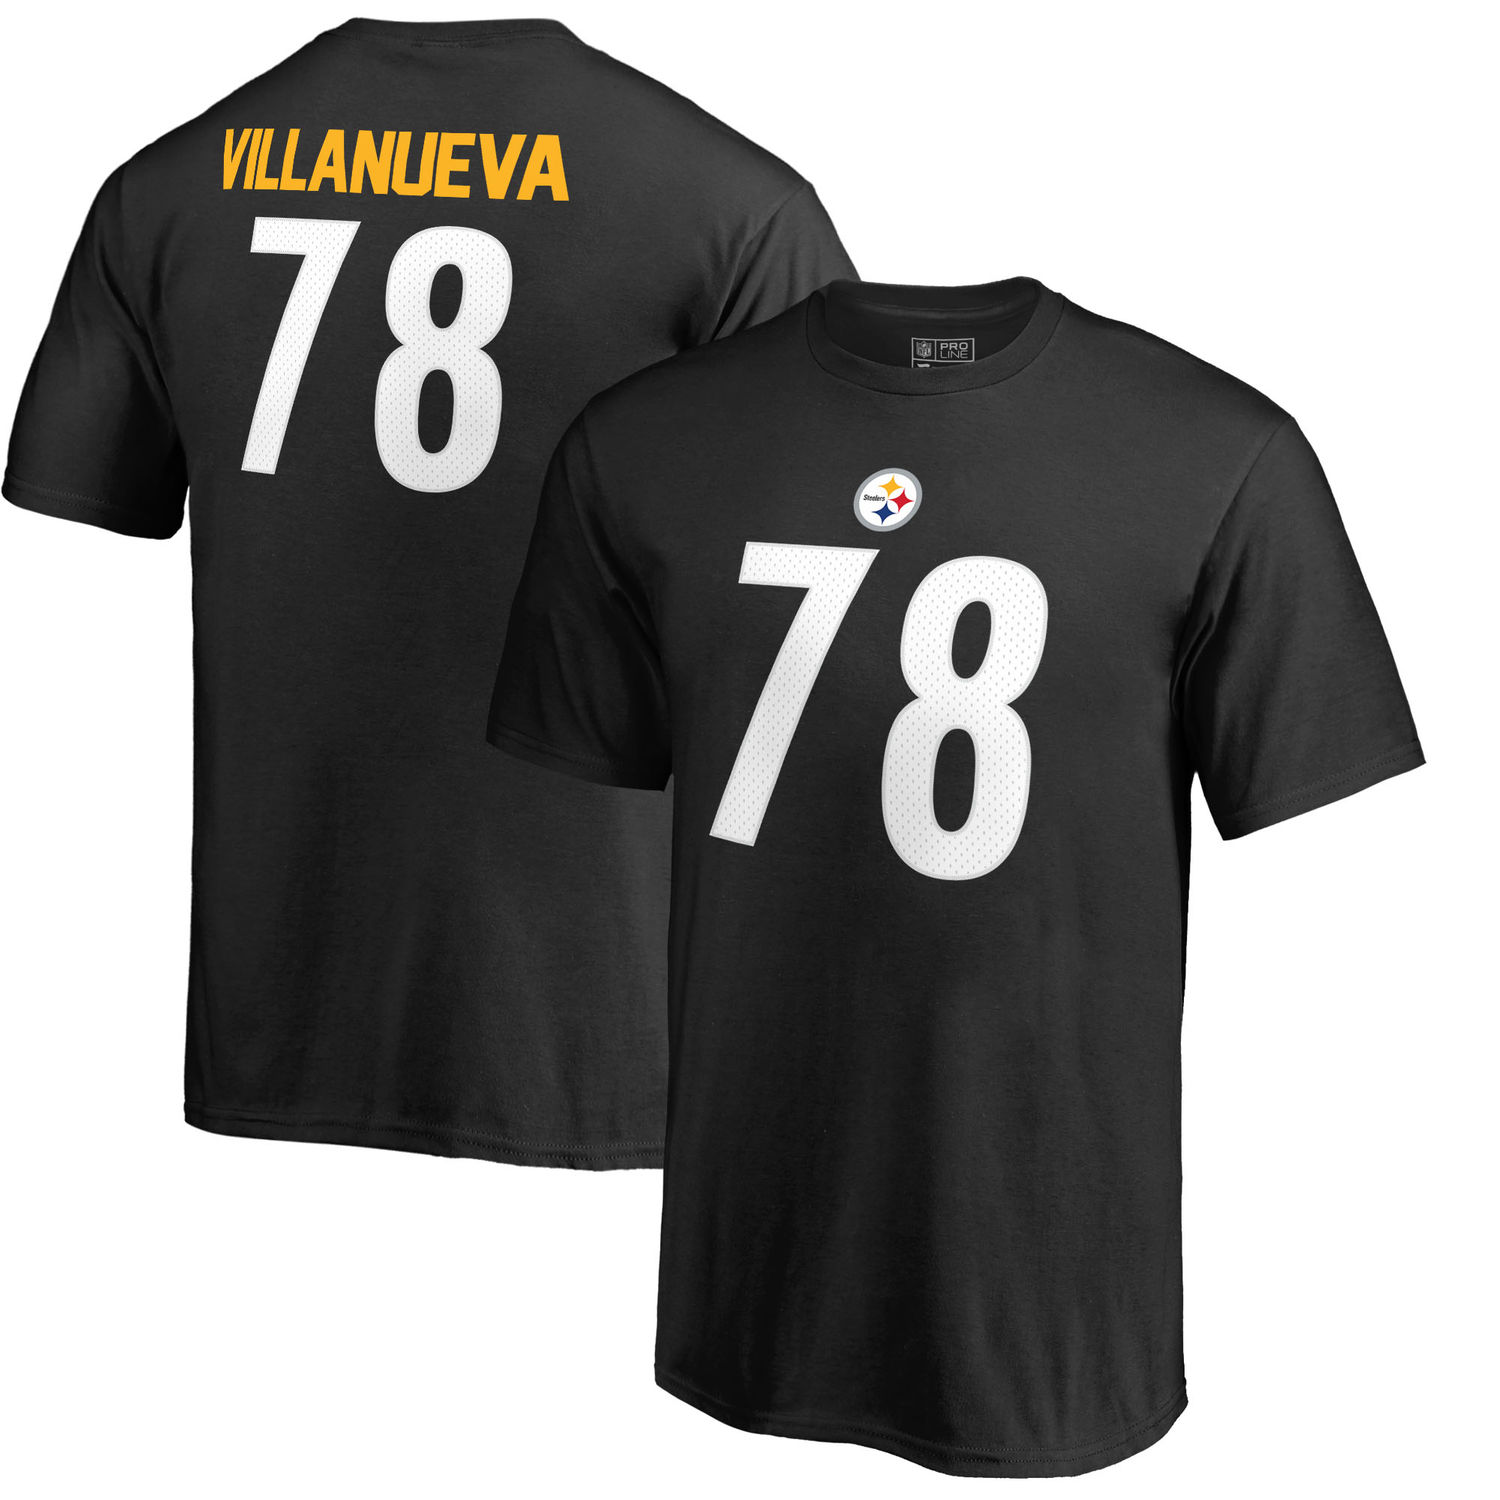 Youth Pittsburgh Steelers 78 Alejandro Villanueva NFL Pro Line by Fanatics Branded Black Authentic Stack Name Number T Shirt